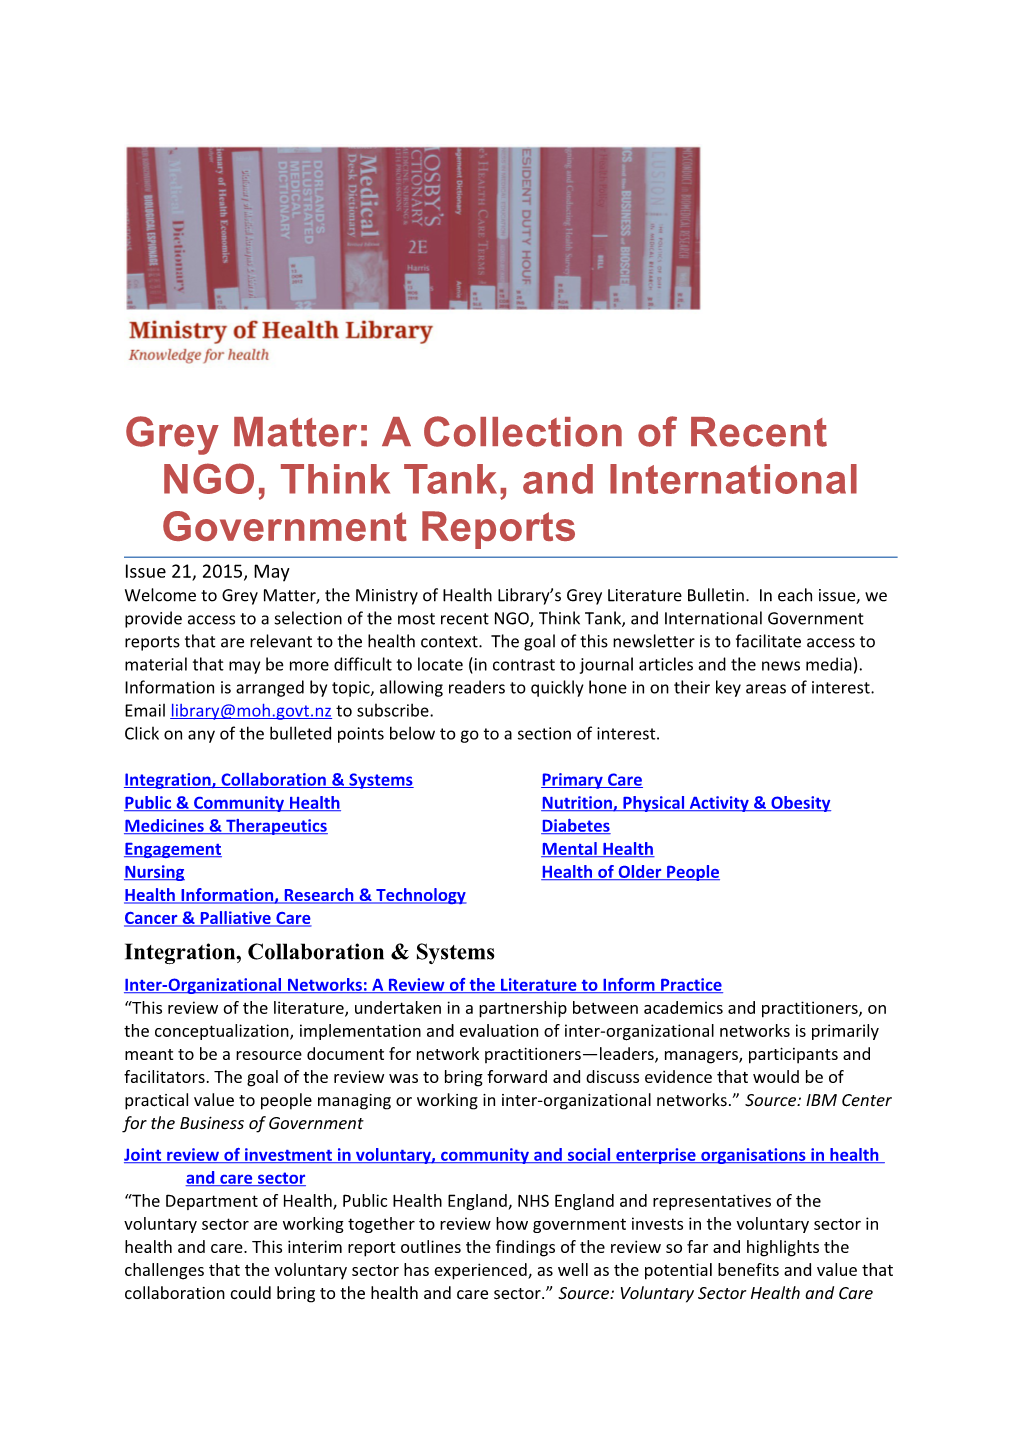 Grey Matter, Issue 21, May 2015